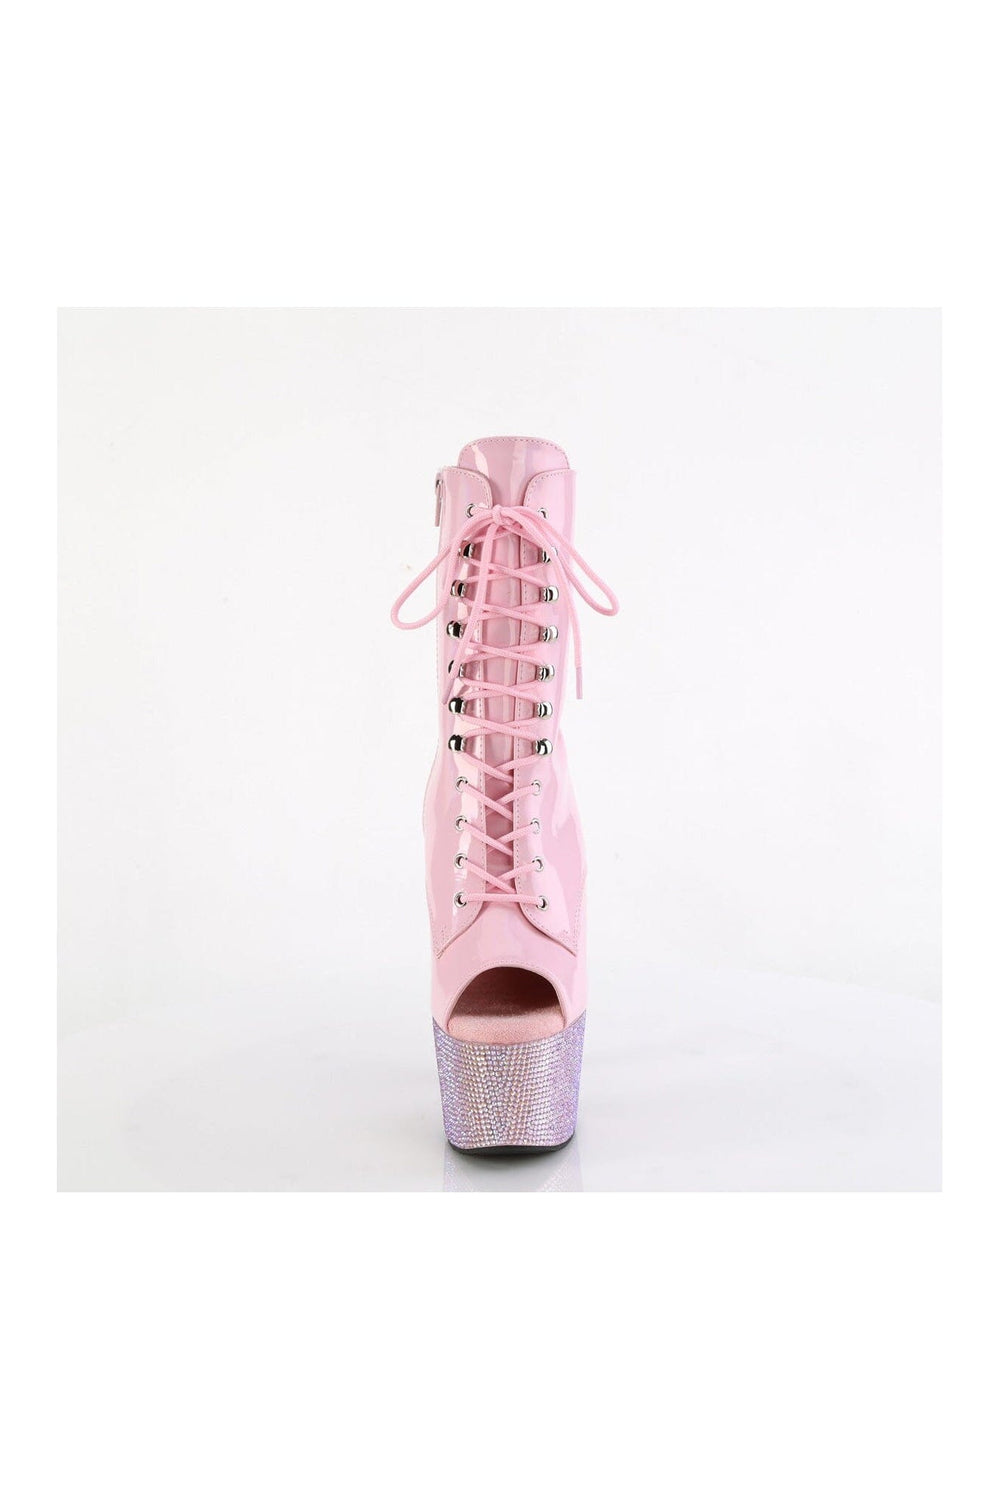 BEJEWELED-1021-7 Pink Patent Ankle Boot-Ankle Boots-Pleaser-SEXYSHOES.COM